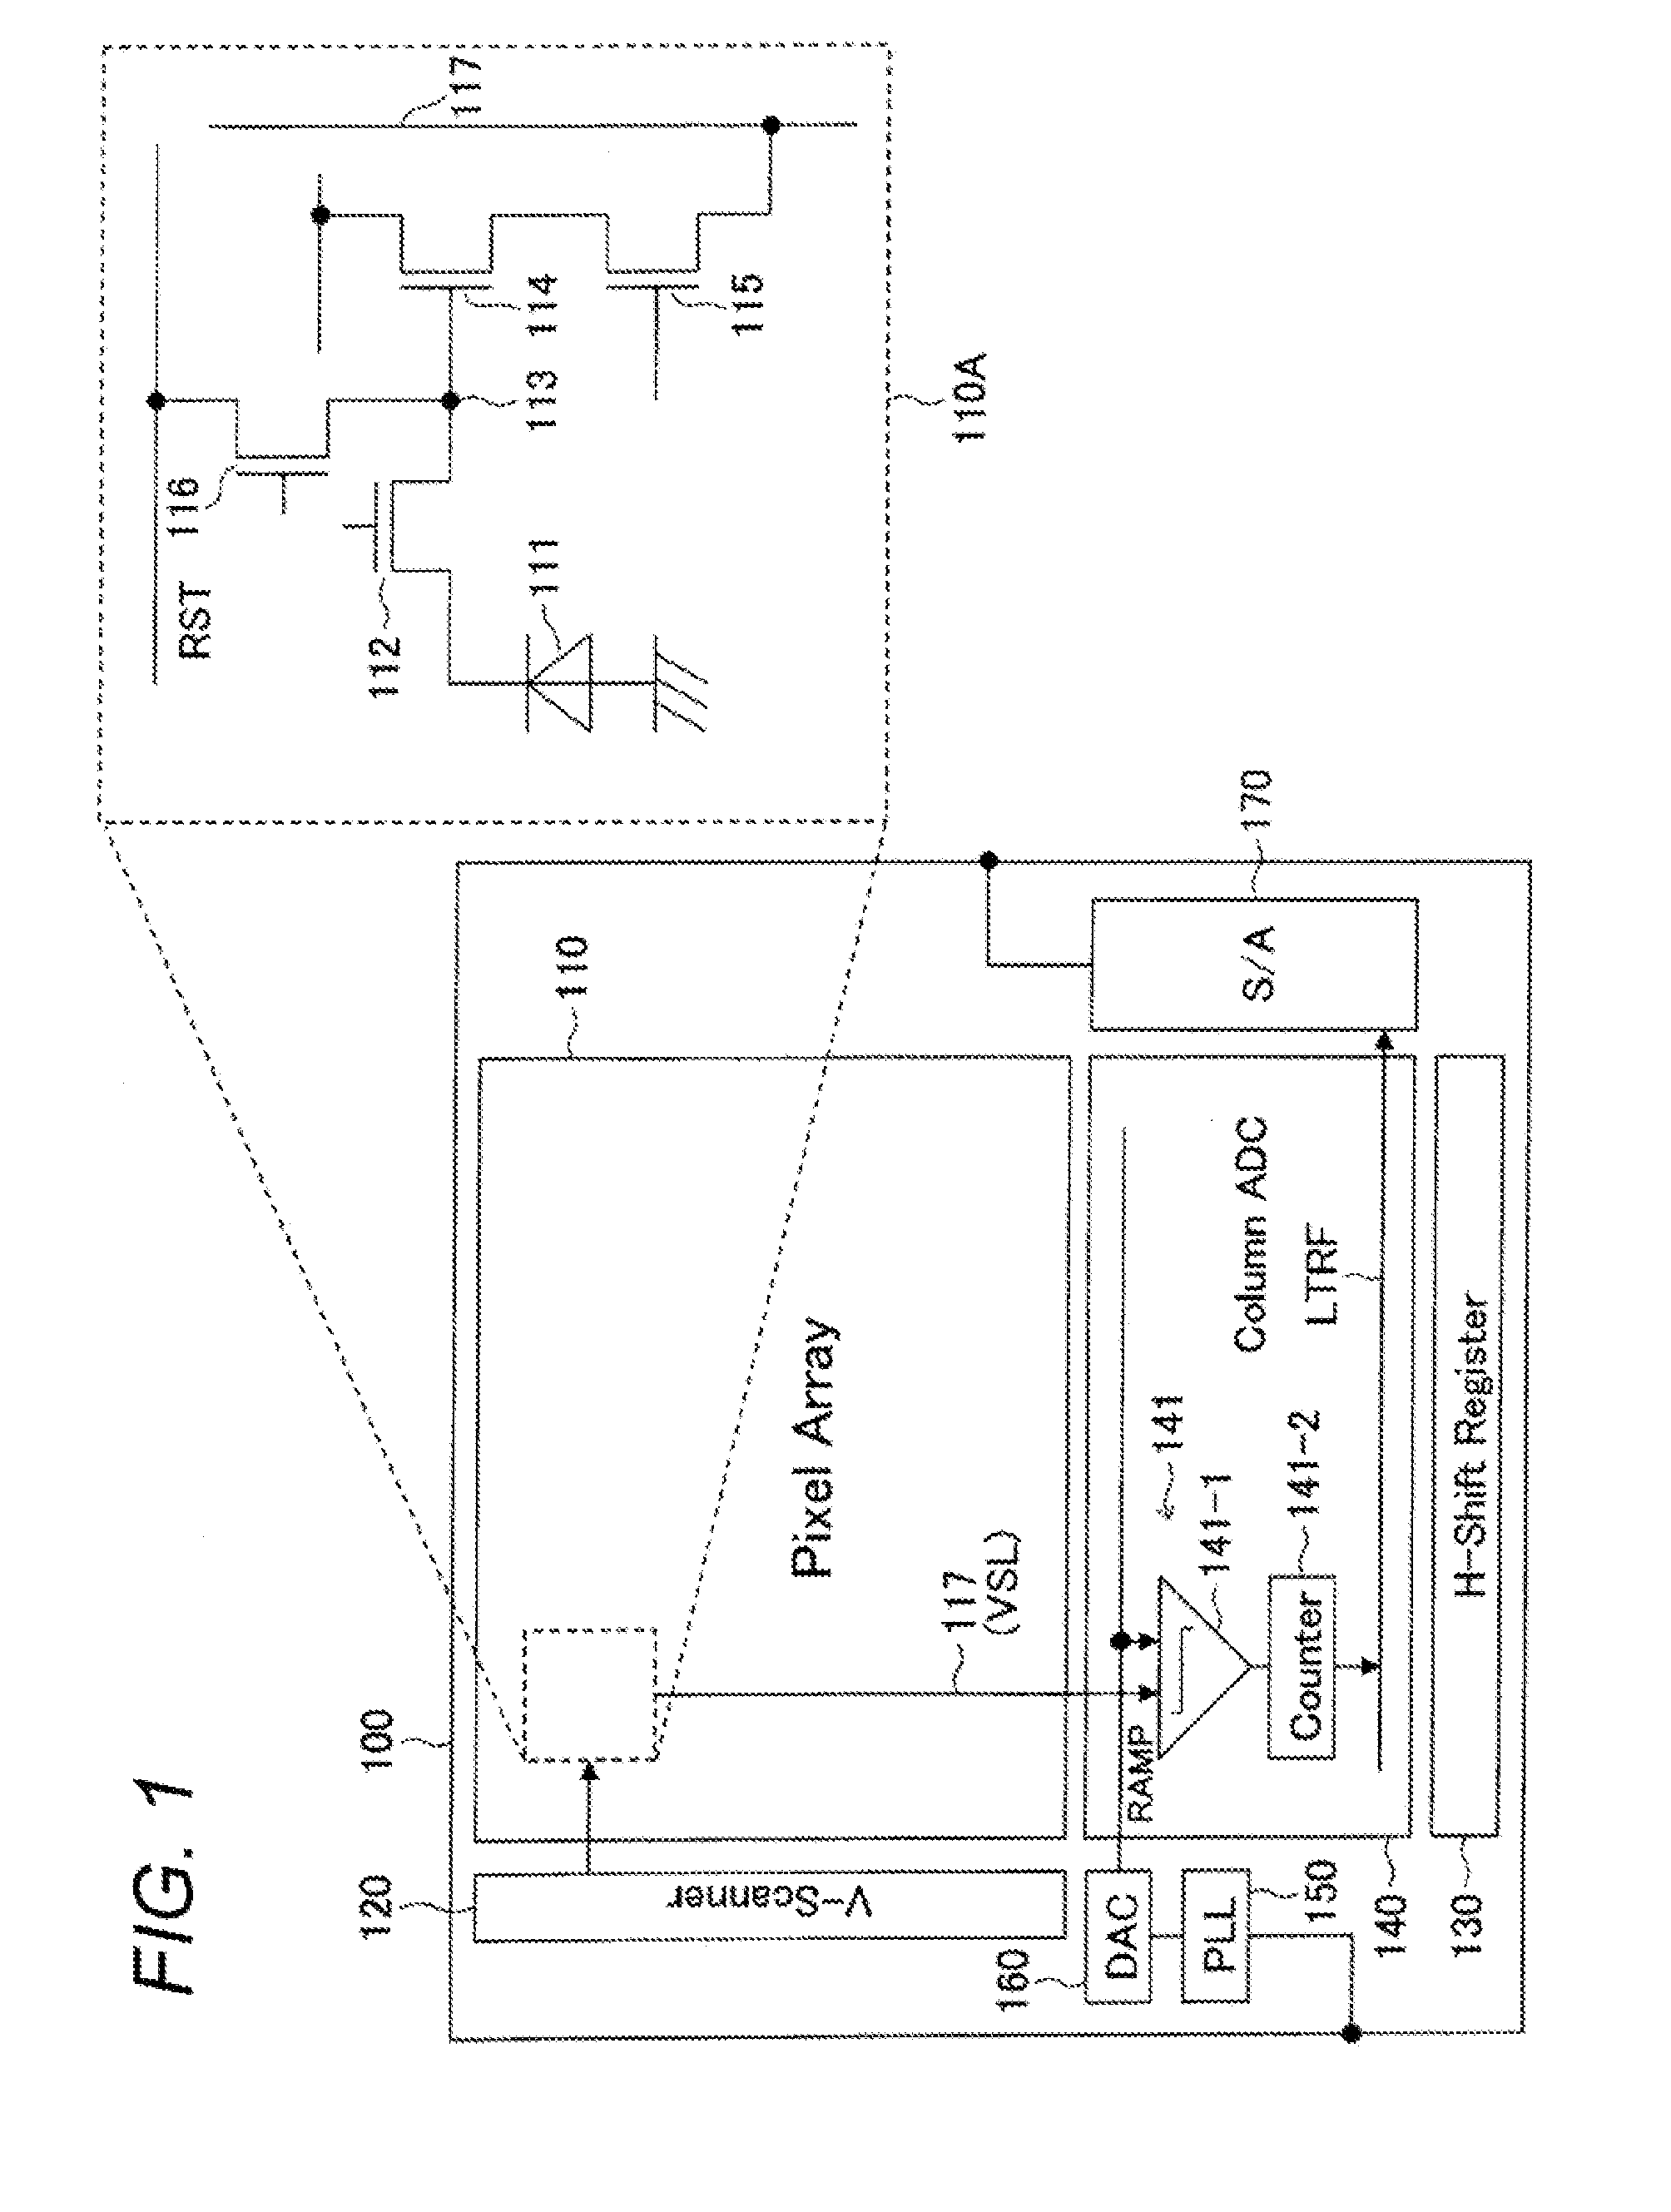 Solid-state image sensor, and imaging system